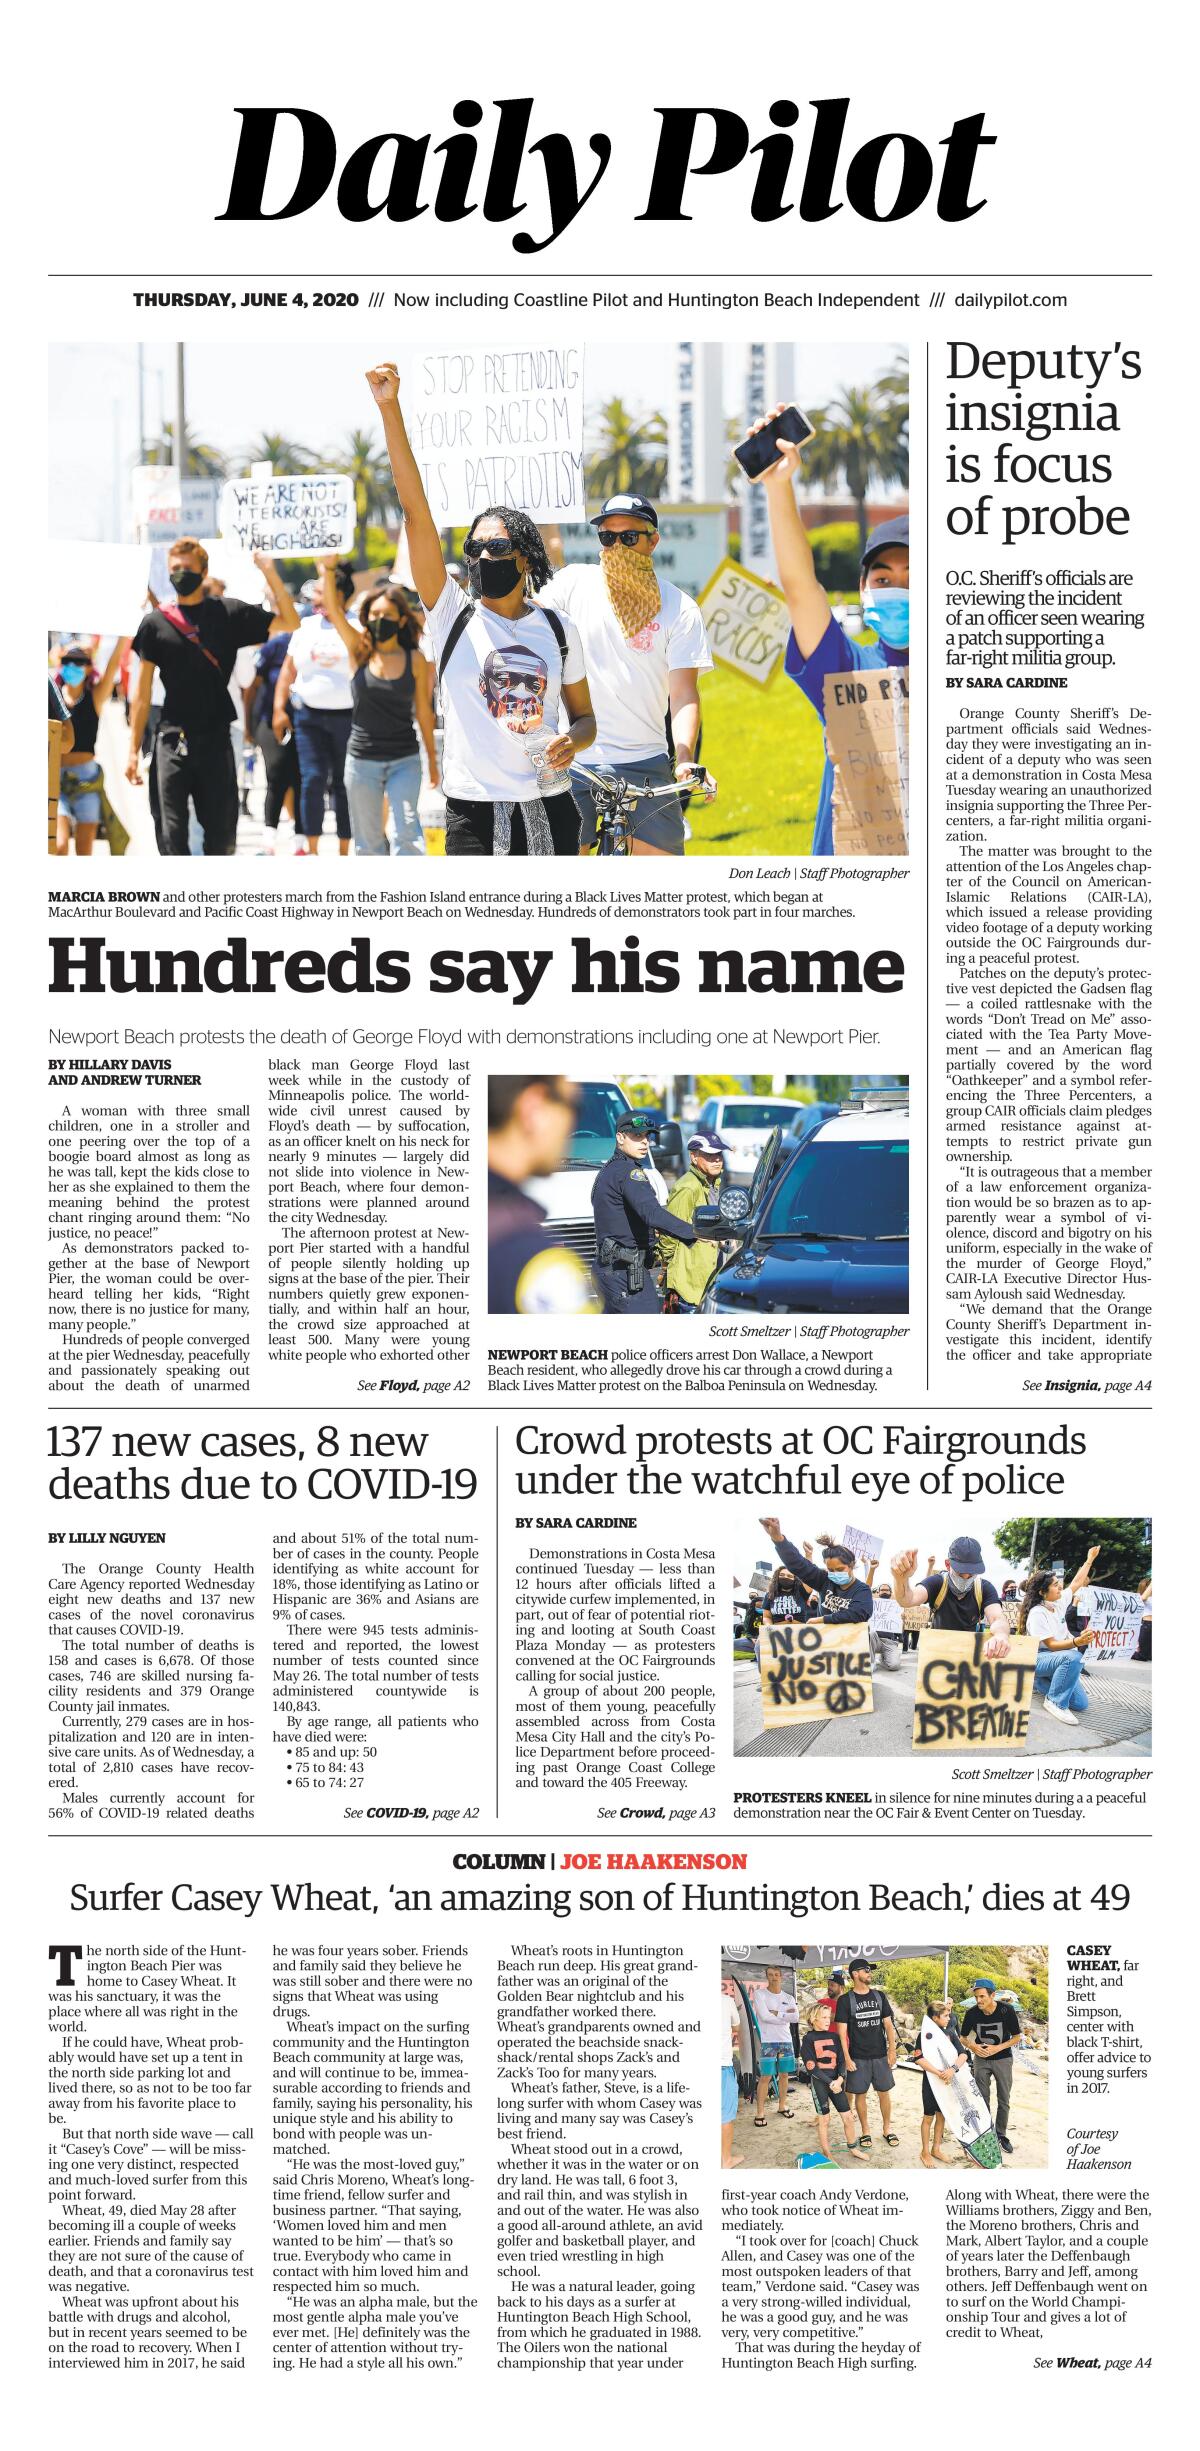 The Daily Pilot's e-newspaper includes all four pages of Thursday's newspaper.